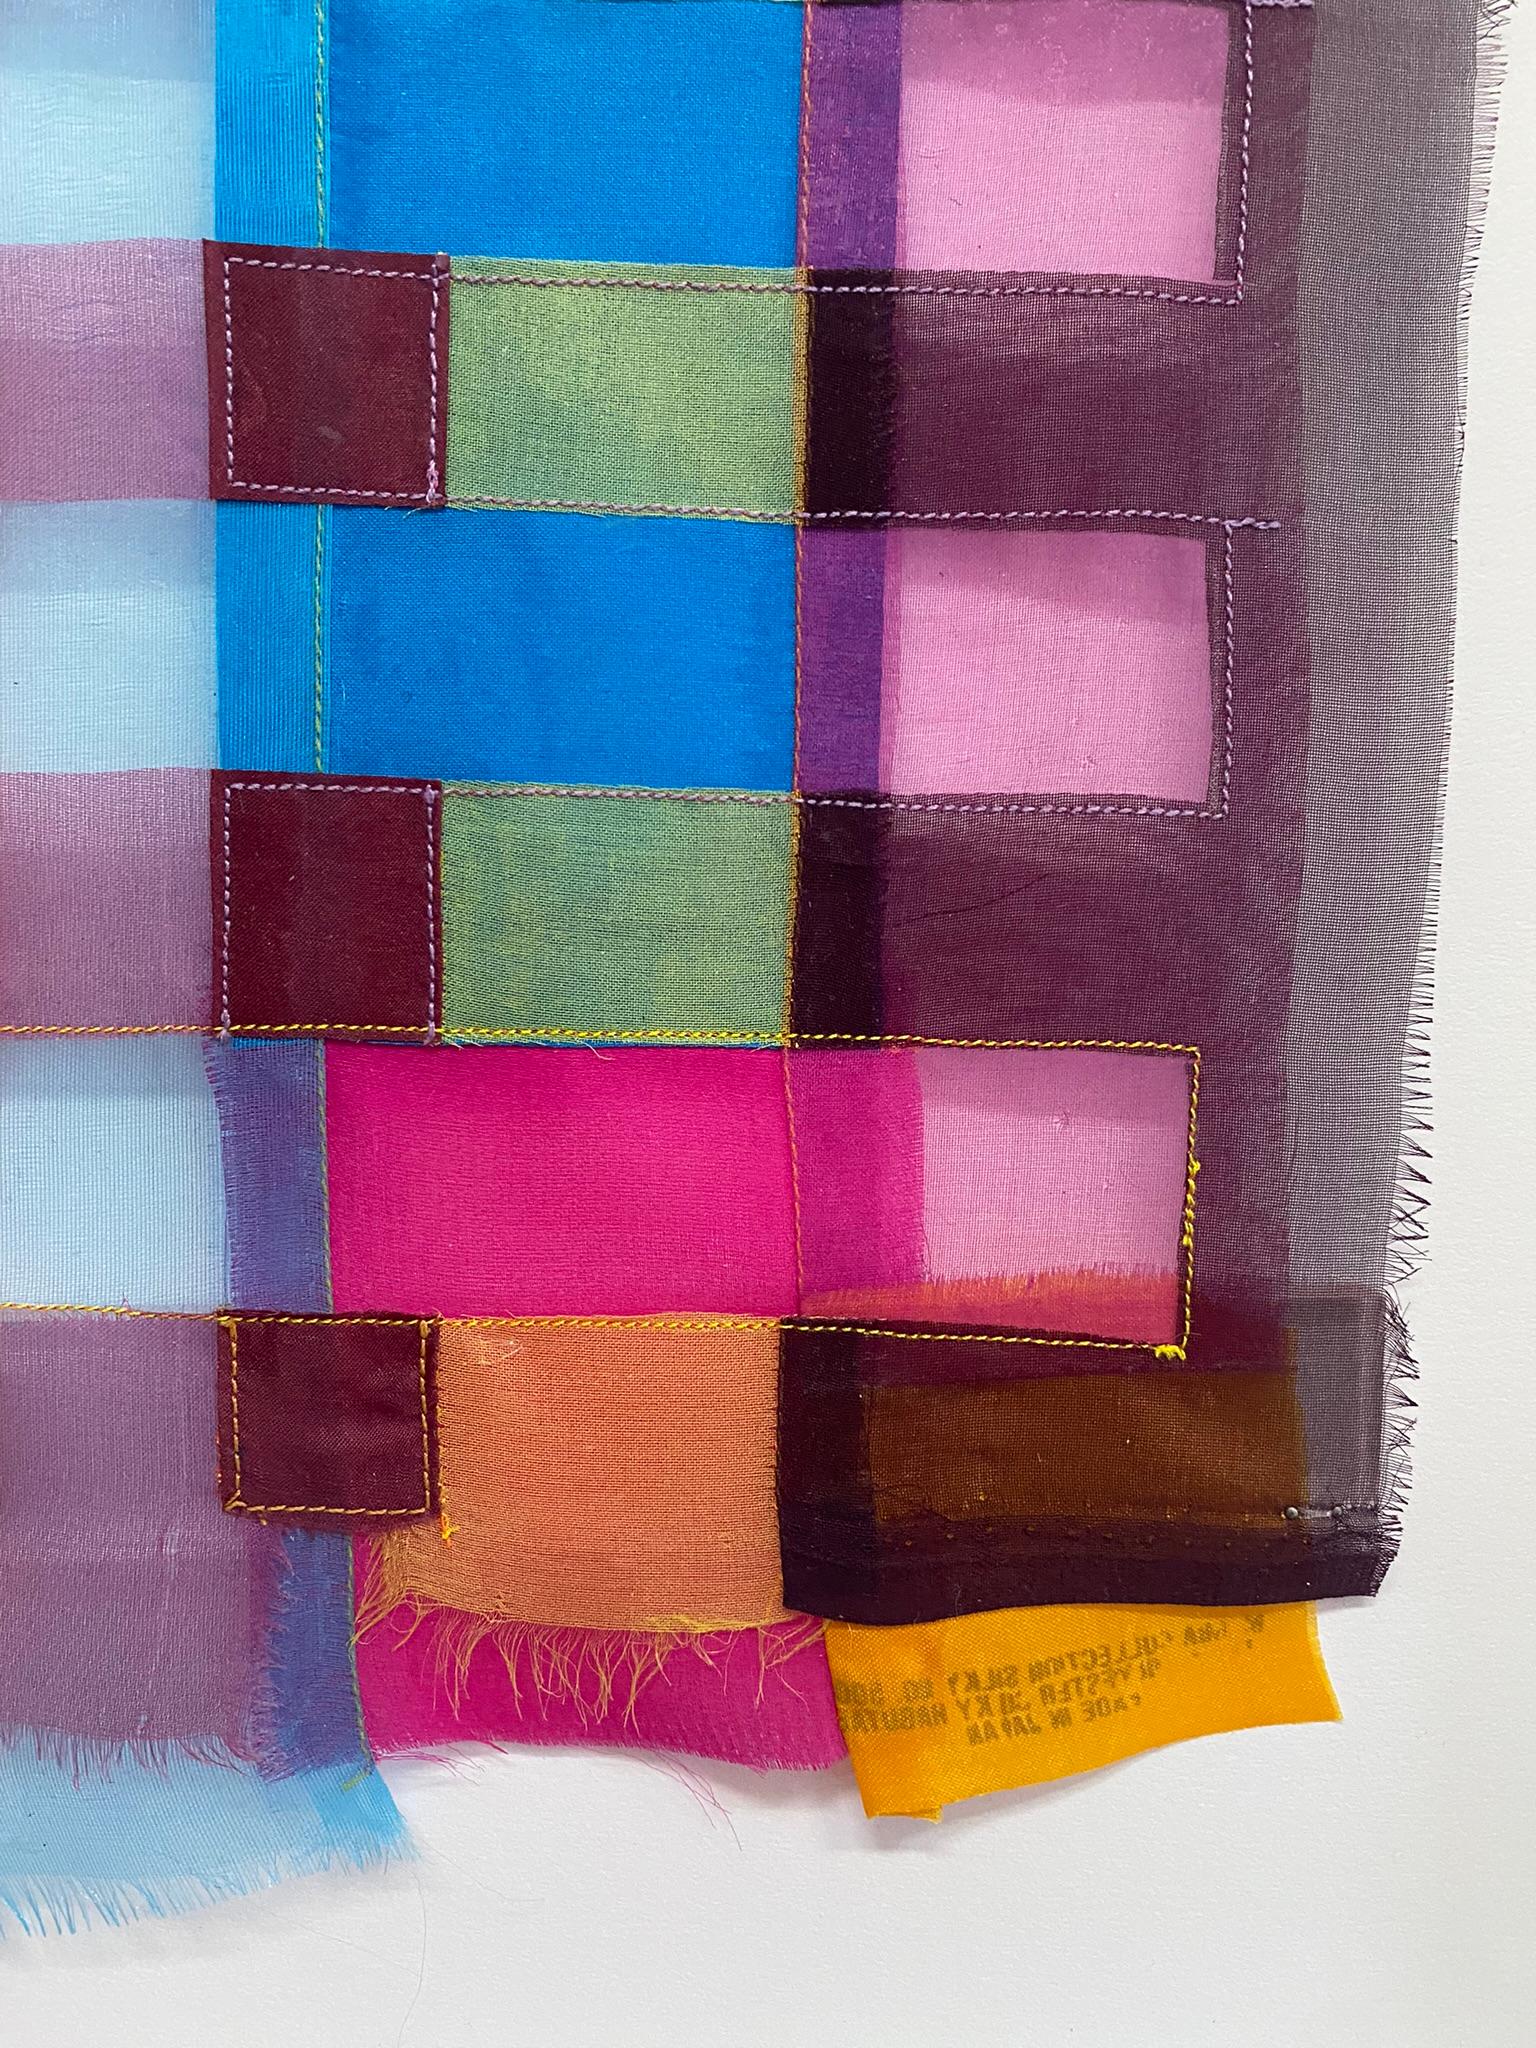 Untitled (0382), colorful abstract fabric sculpture 6